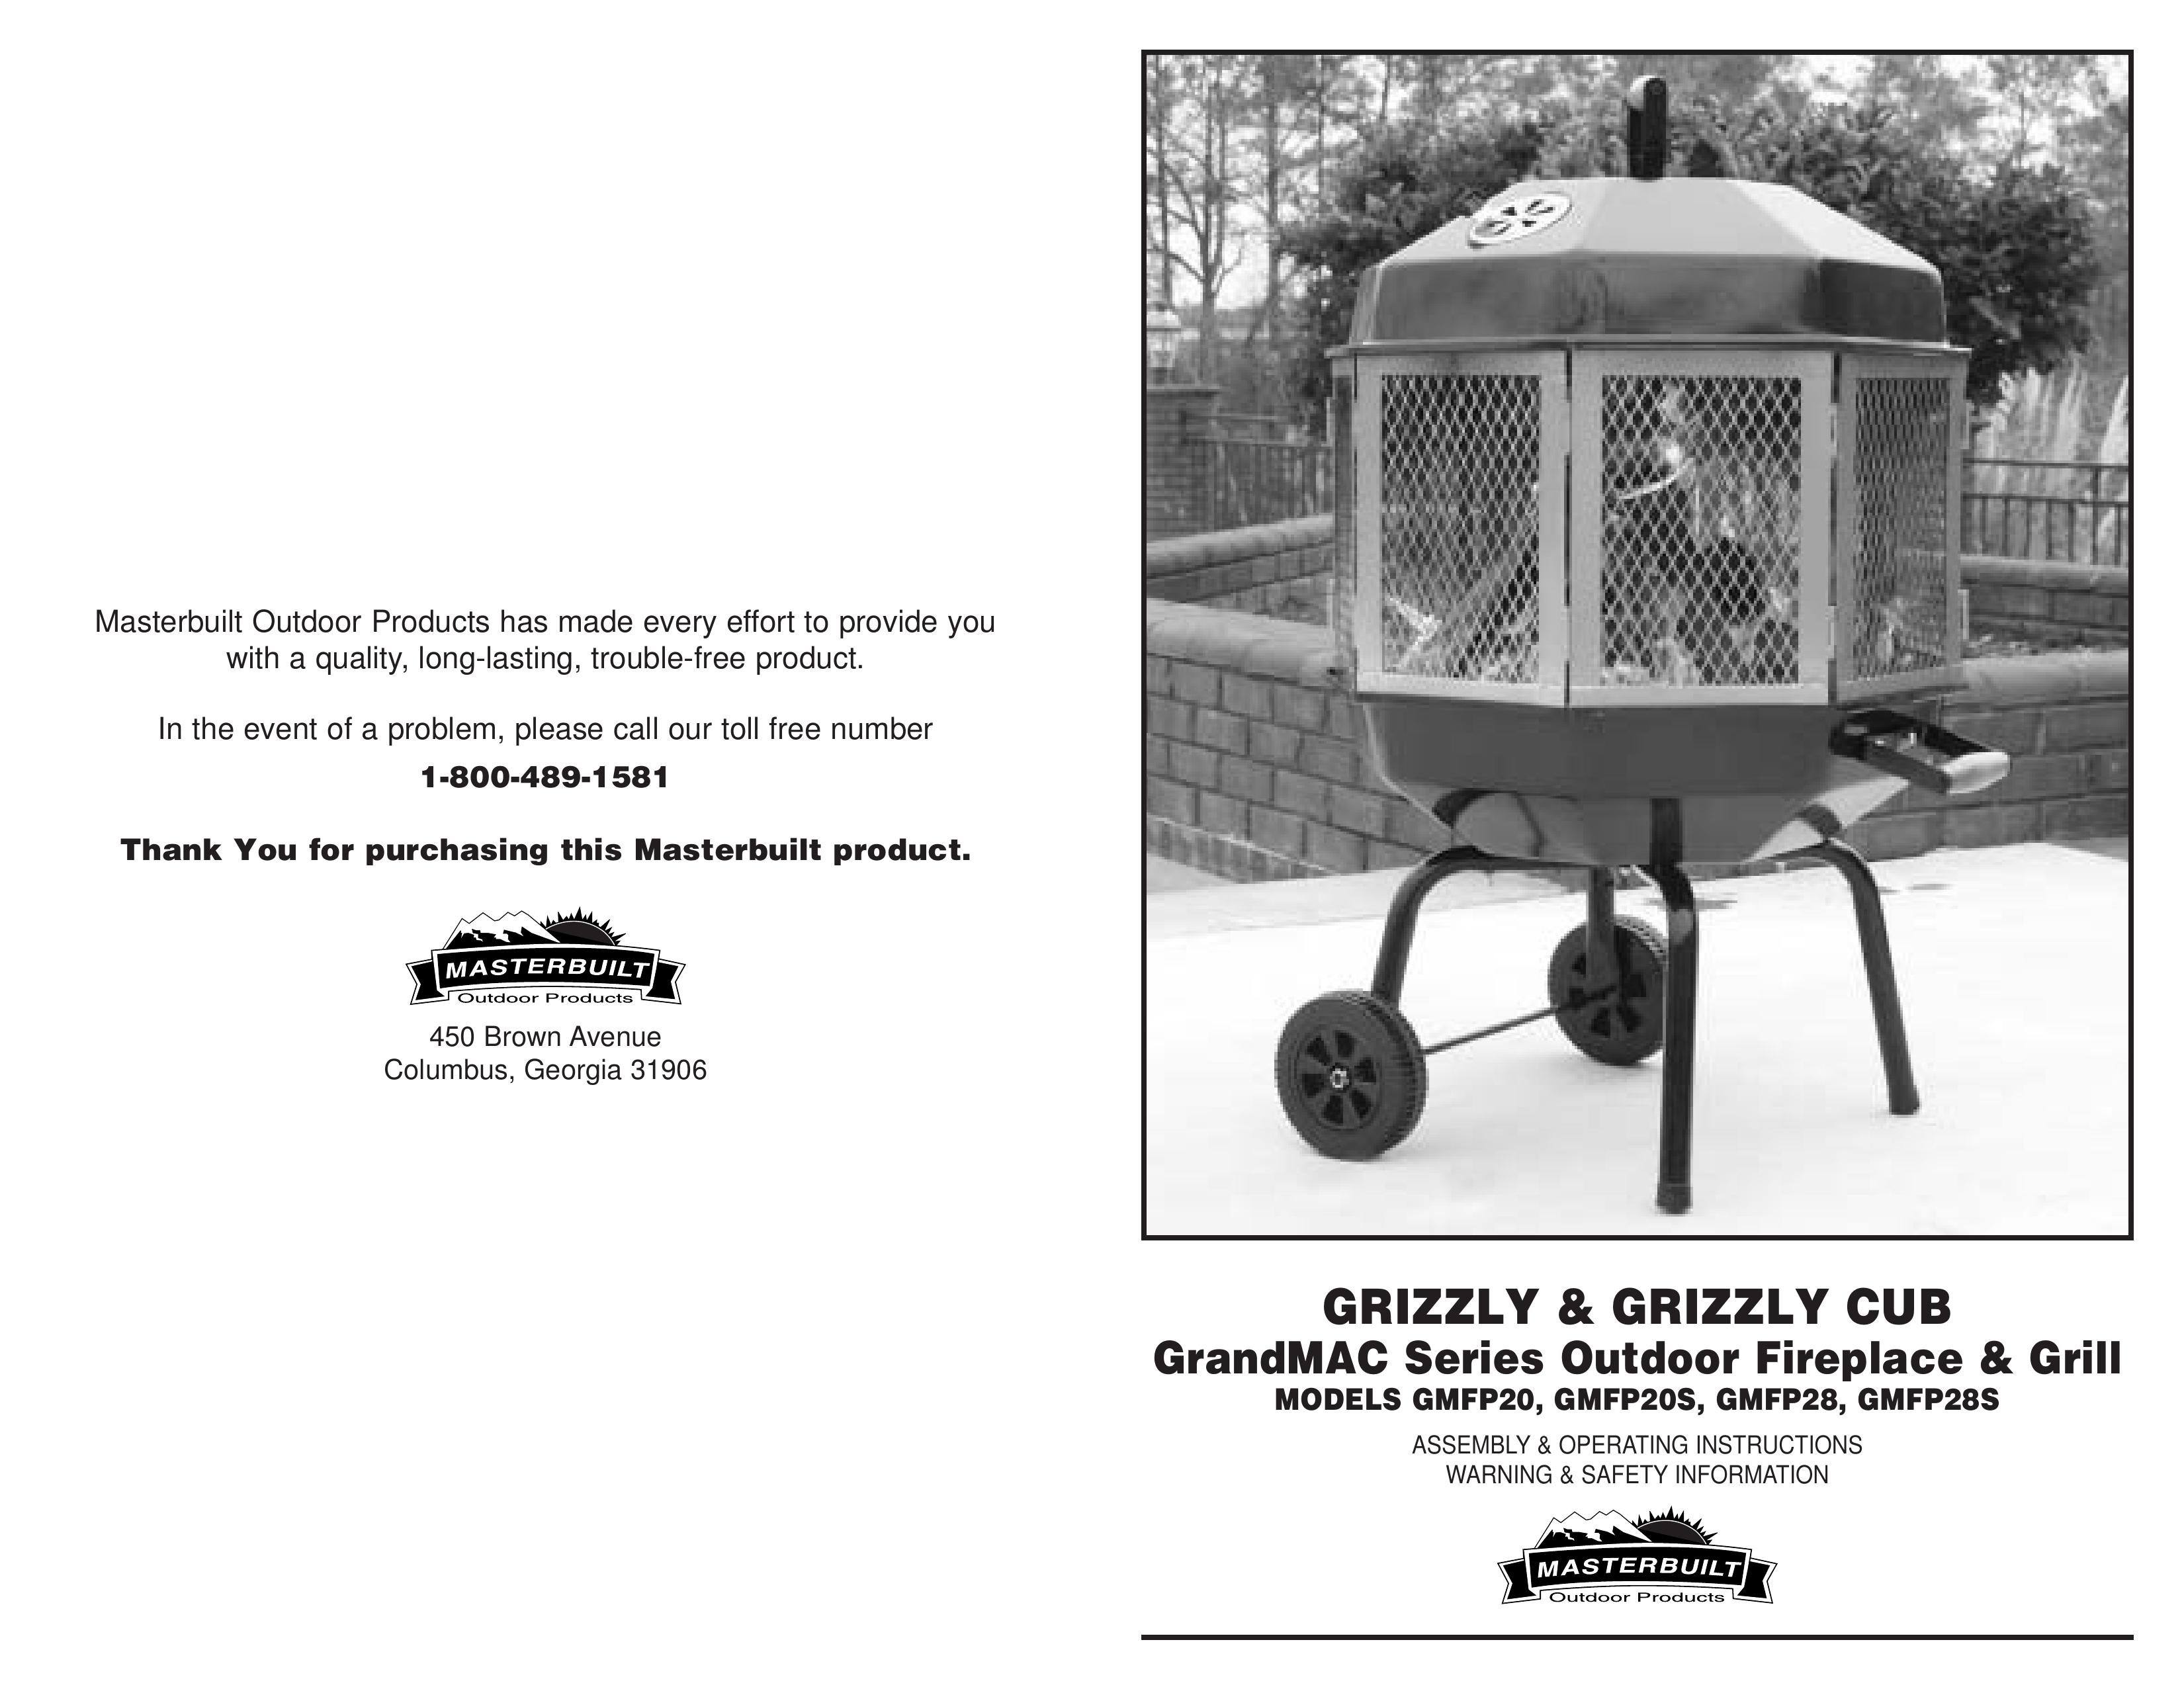 Grizzly GMFP20S Outdoor Fireplace User Manual